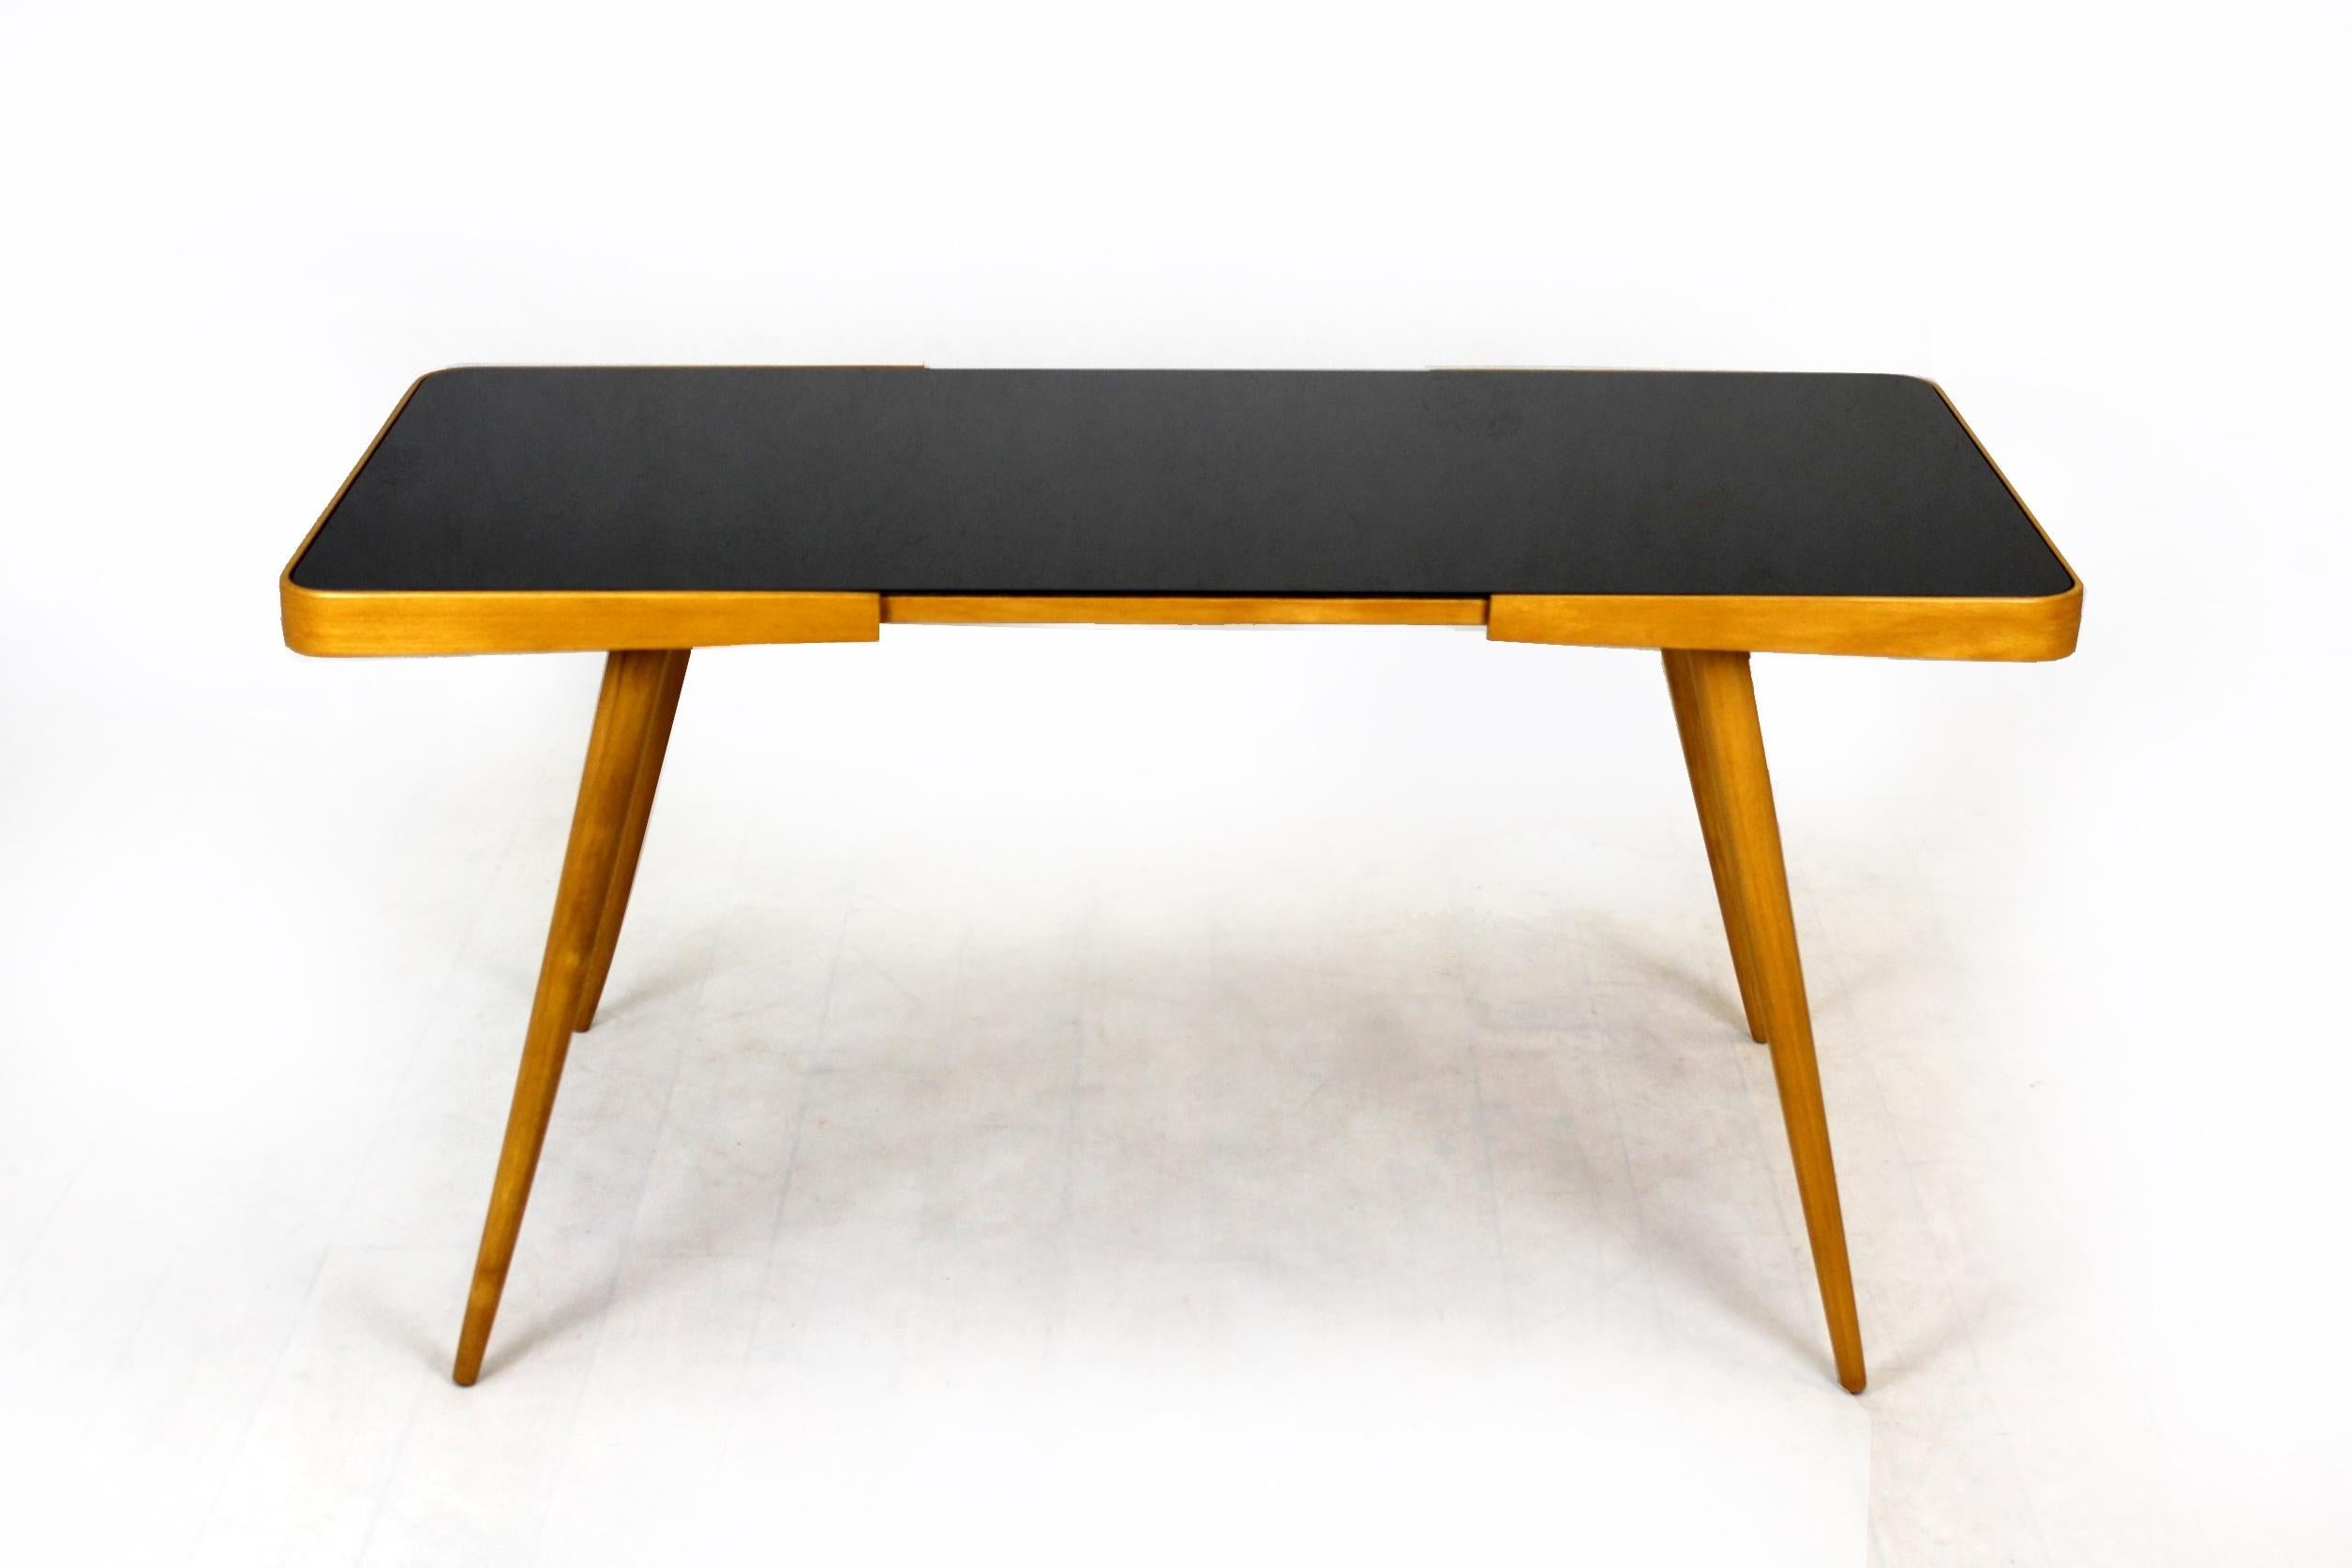 
Coffee table with black glass top. Designed by Jiri Jiroutek and produced in the 1960s by Cesky Nabytek. The table has been completely restored, lacquered wood, satin finished, new glass top.